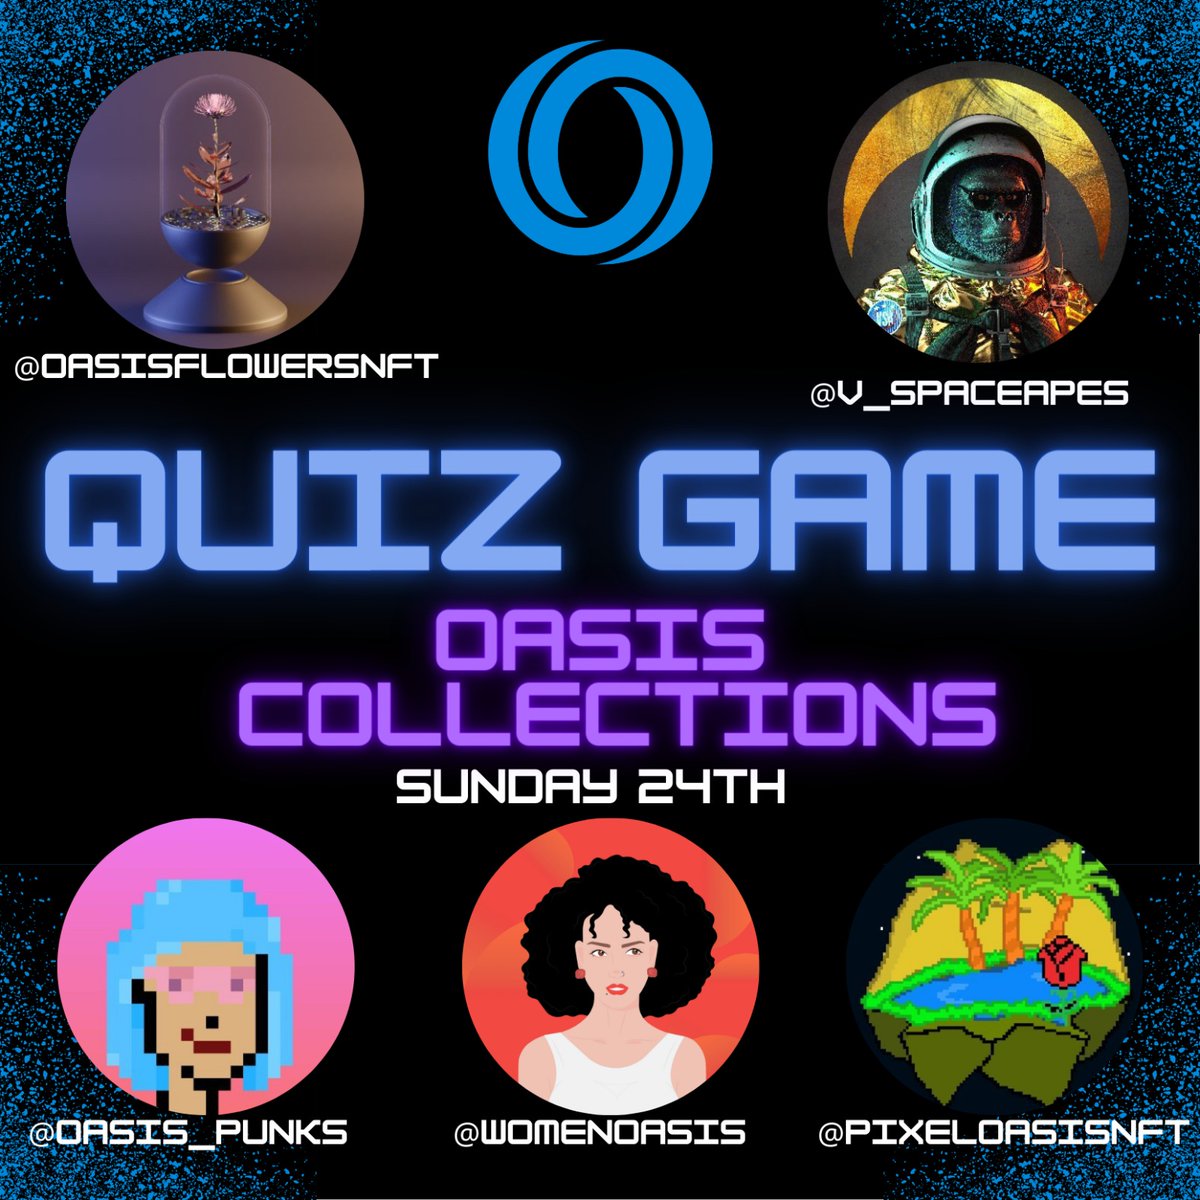 1/2
We would like to announce that this Sunday at 15:00 UTC we will be hosting our quiz game on Discord💜

We are delighted that the guest collections for this weekend will be💃:

- @oasis_punks
- @PixelOasisNFT
- @OasisFlowersNFT
- @V_SpaceApes

Keep reading for prizes 👀

#ROSE